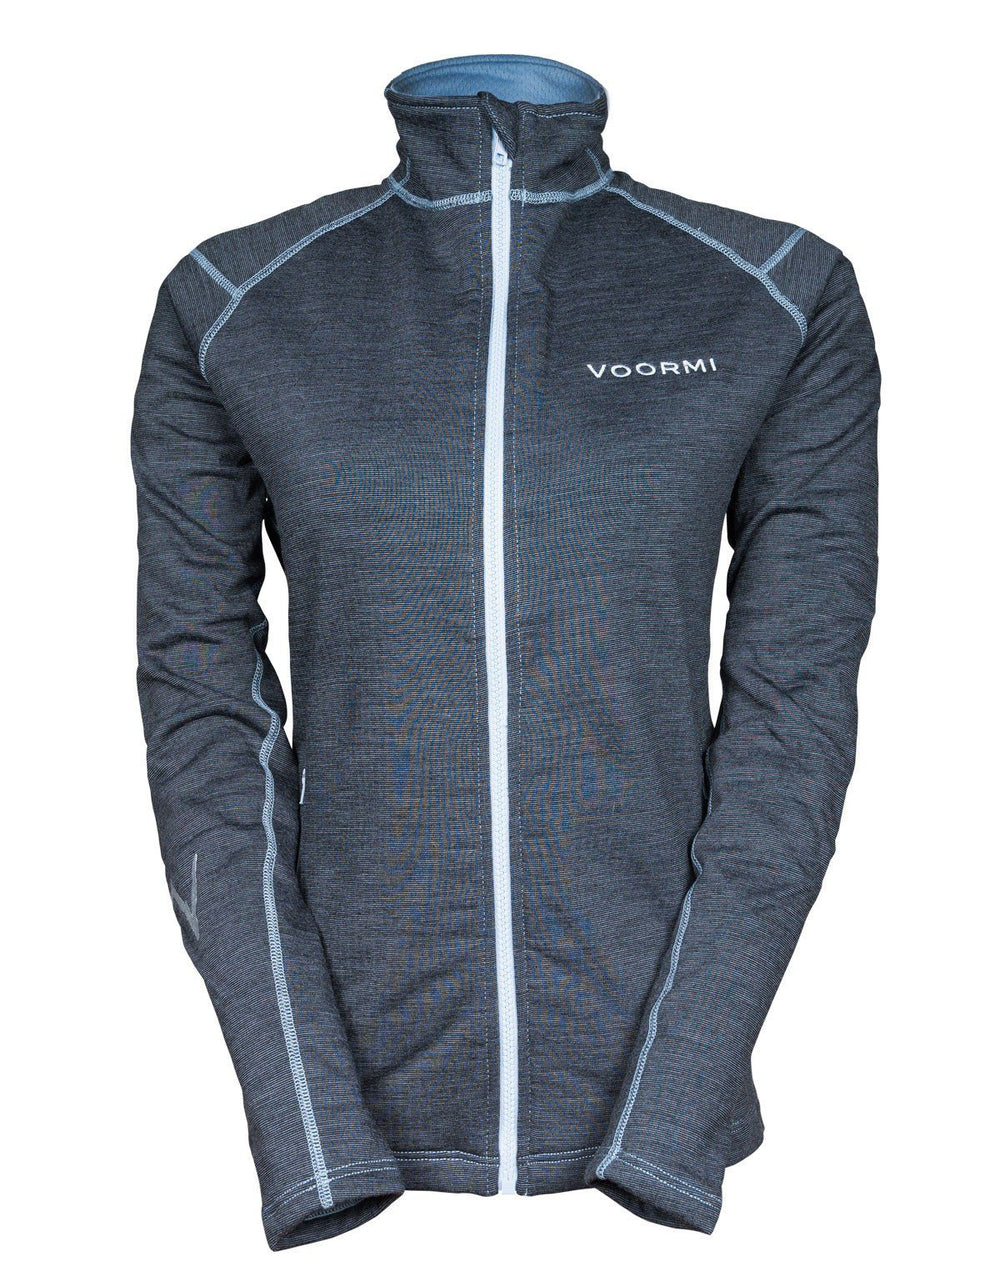 Women's Drift Jacket | Available in 4 Colors | VOORMI